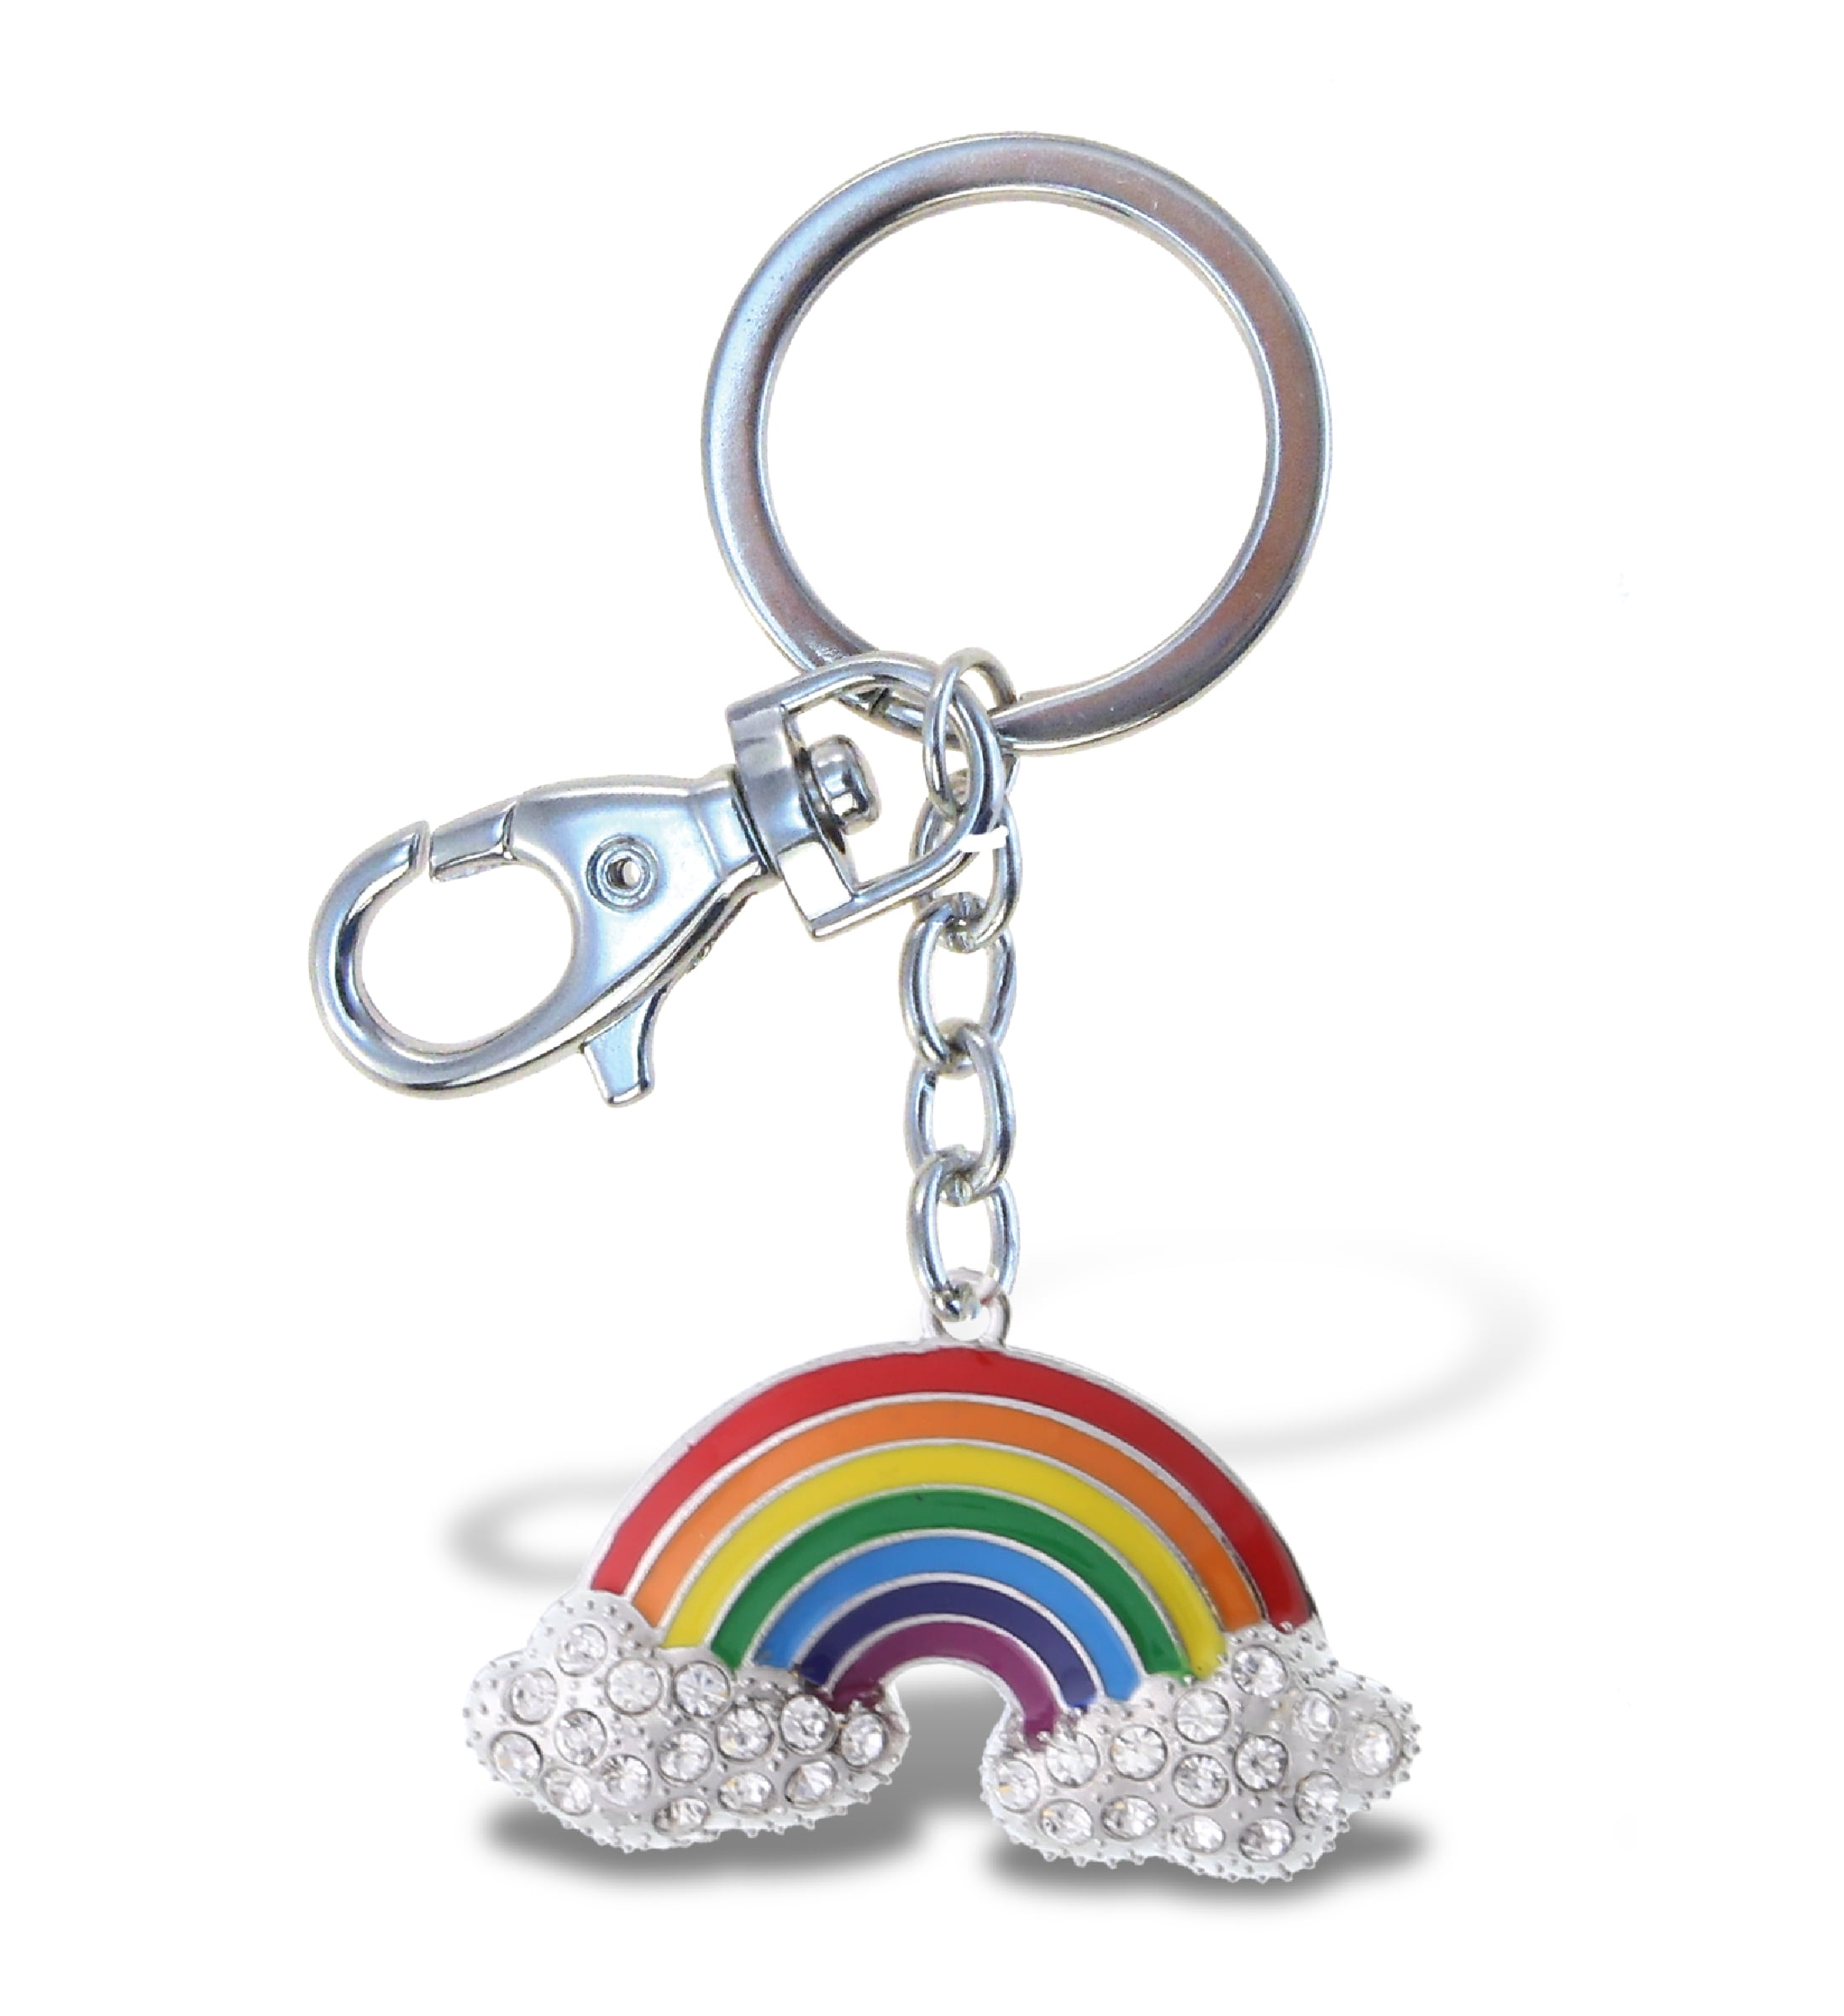 Chrome Plated Letter M Keychain Ring With Swarovski Crystals - Stephanie  Imports